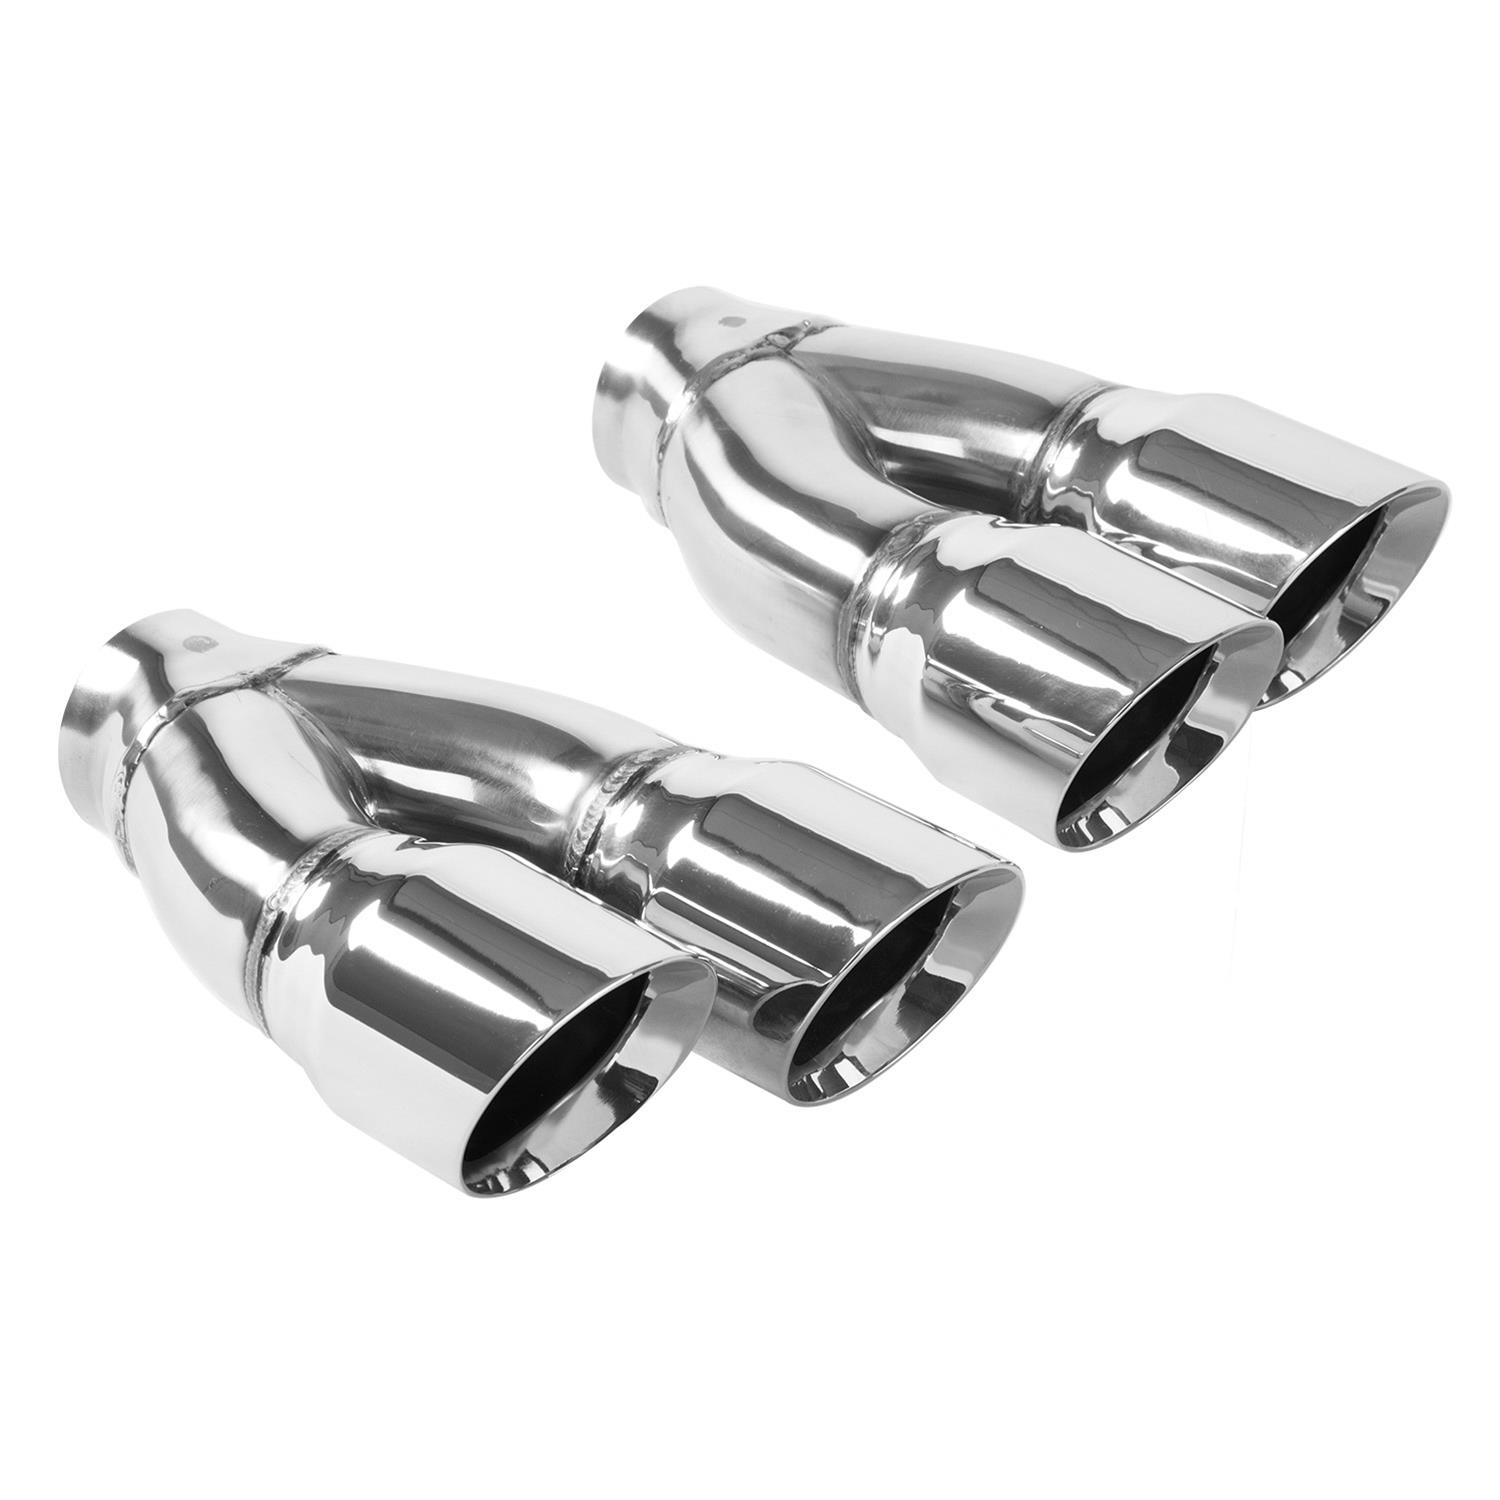 Magnaflow 35129 Exhaust Tip 2.25" Inlet 7.5" Long 3.2x2.5" Outlet Stainless